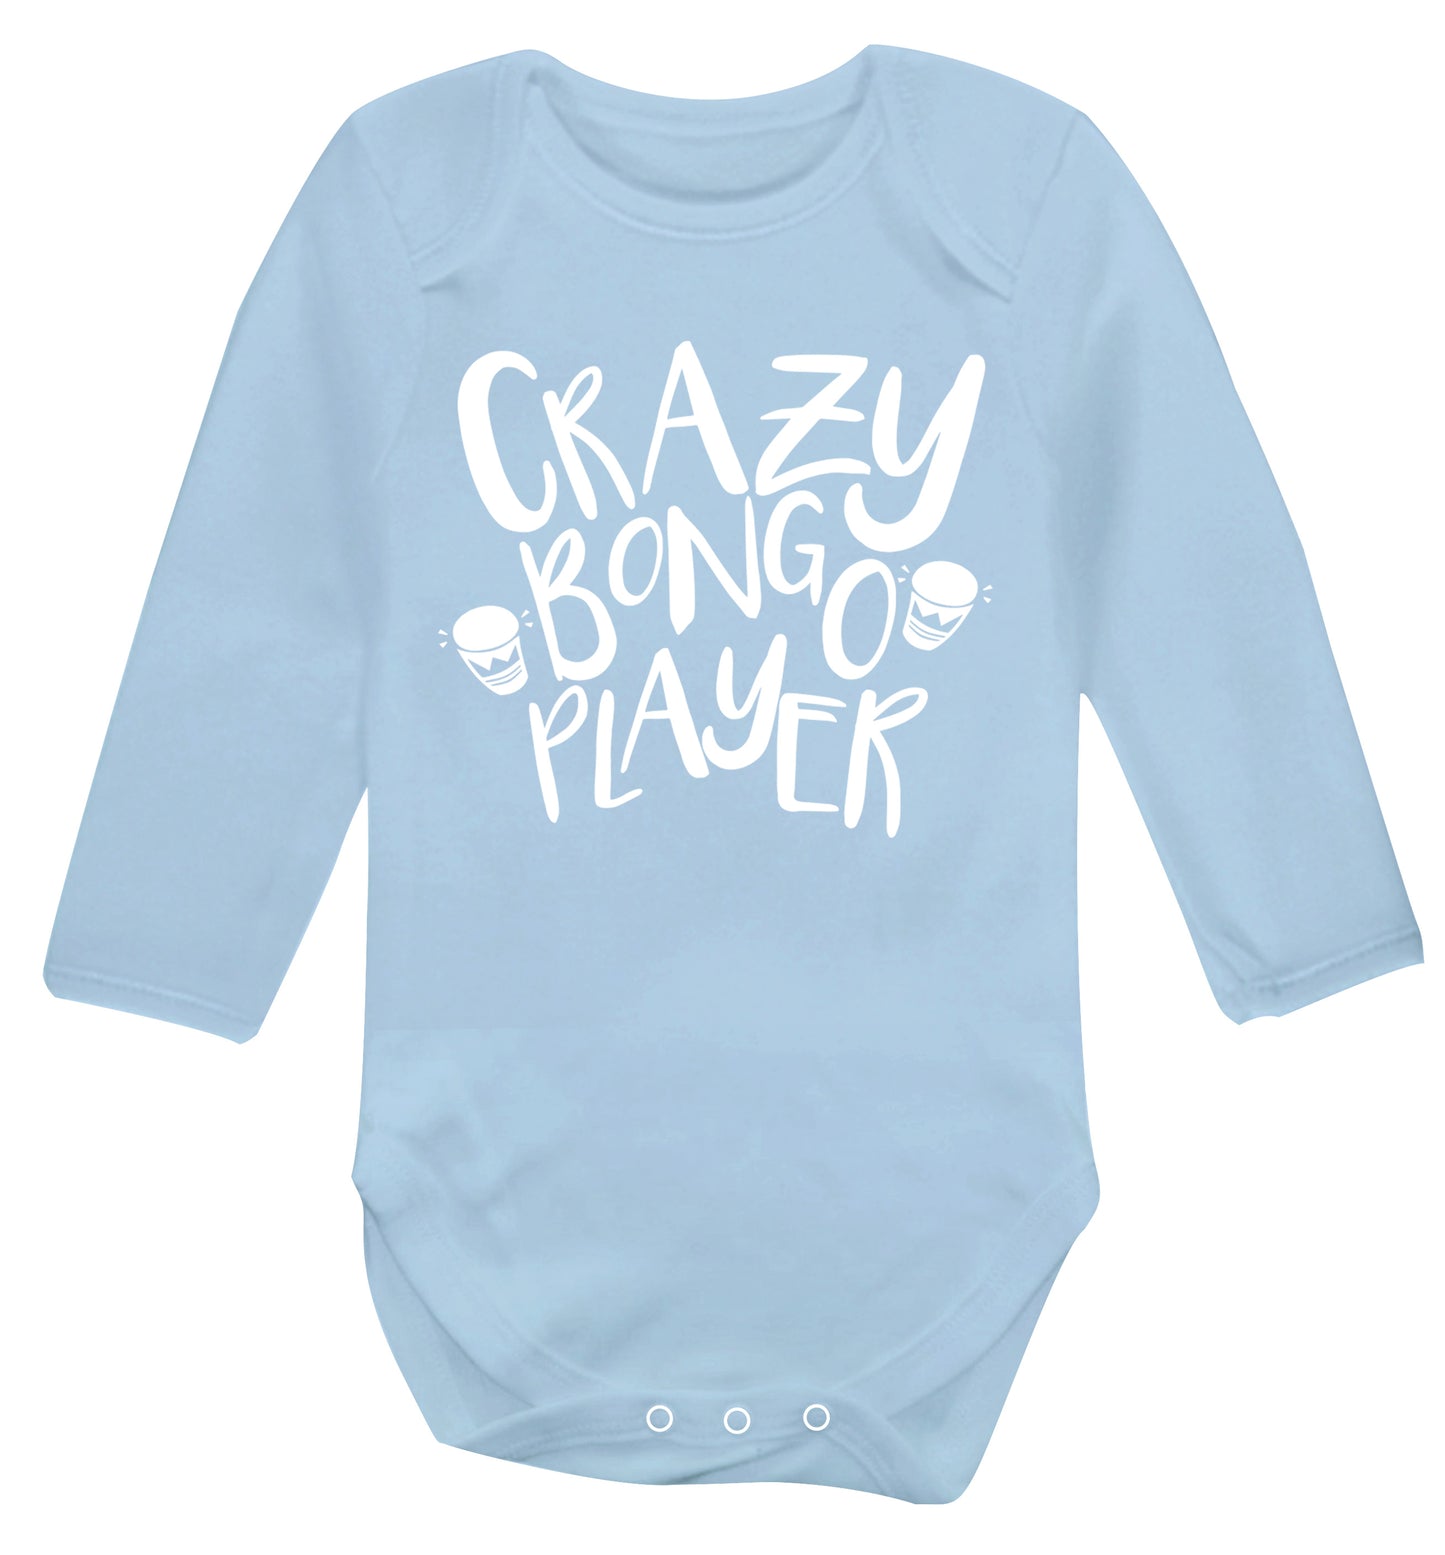 Crazy bongo player Baby Vest long sleeved pale blue 6-12 months